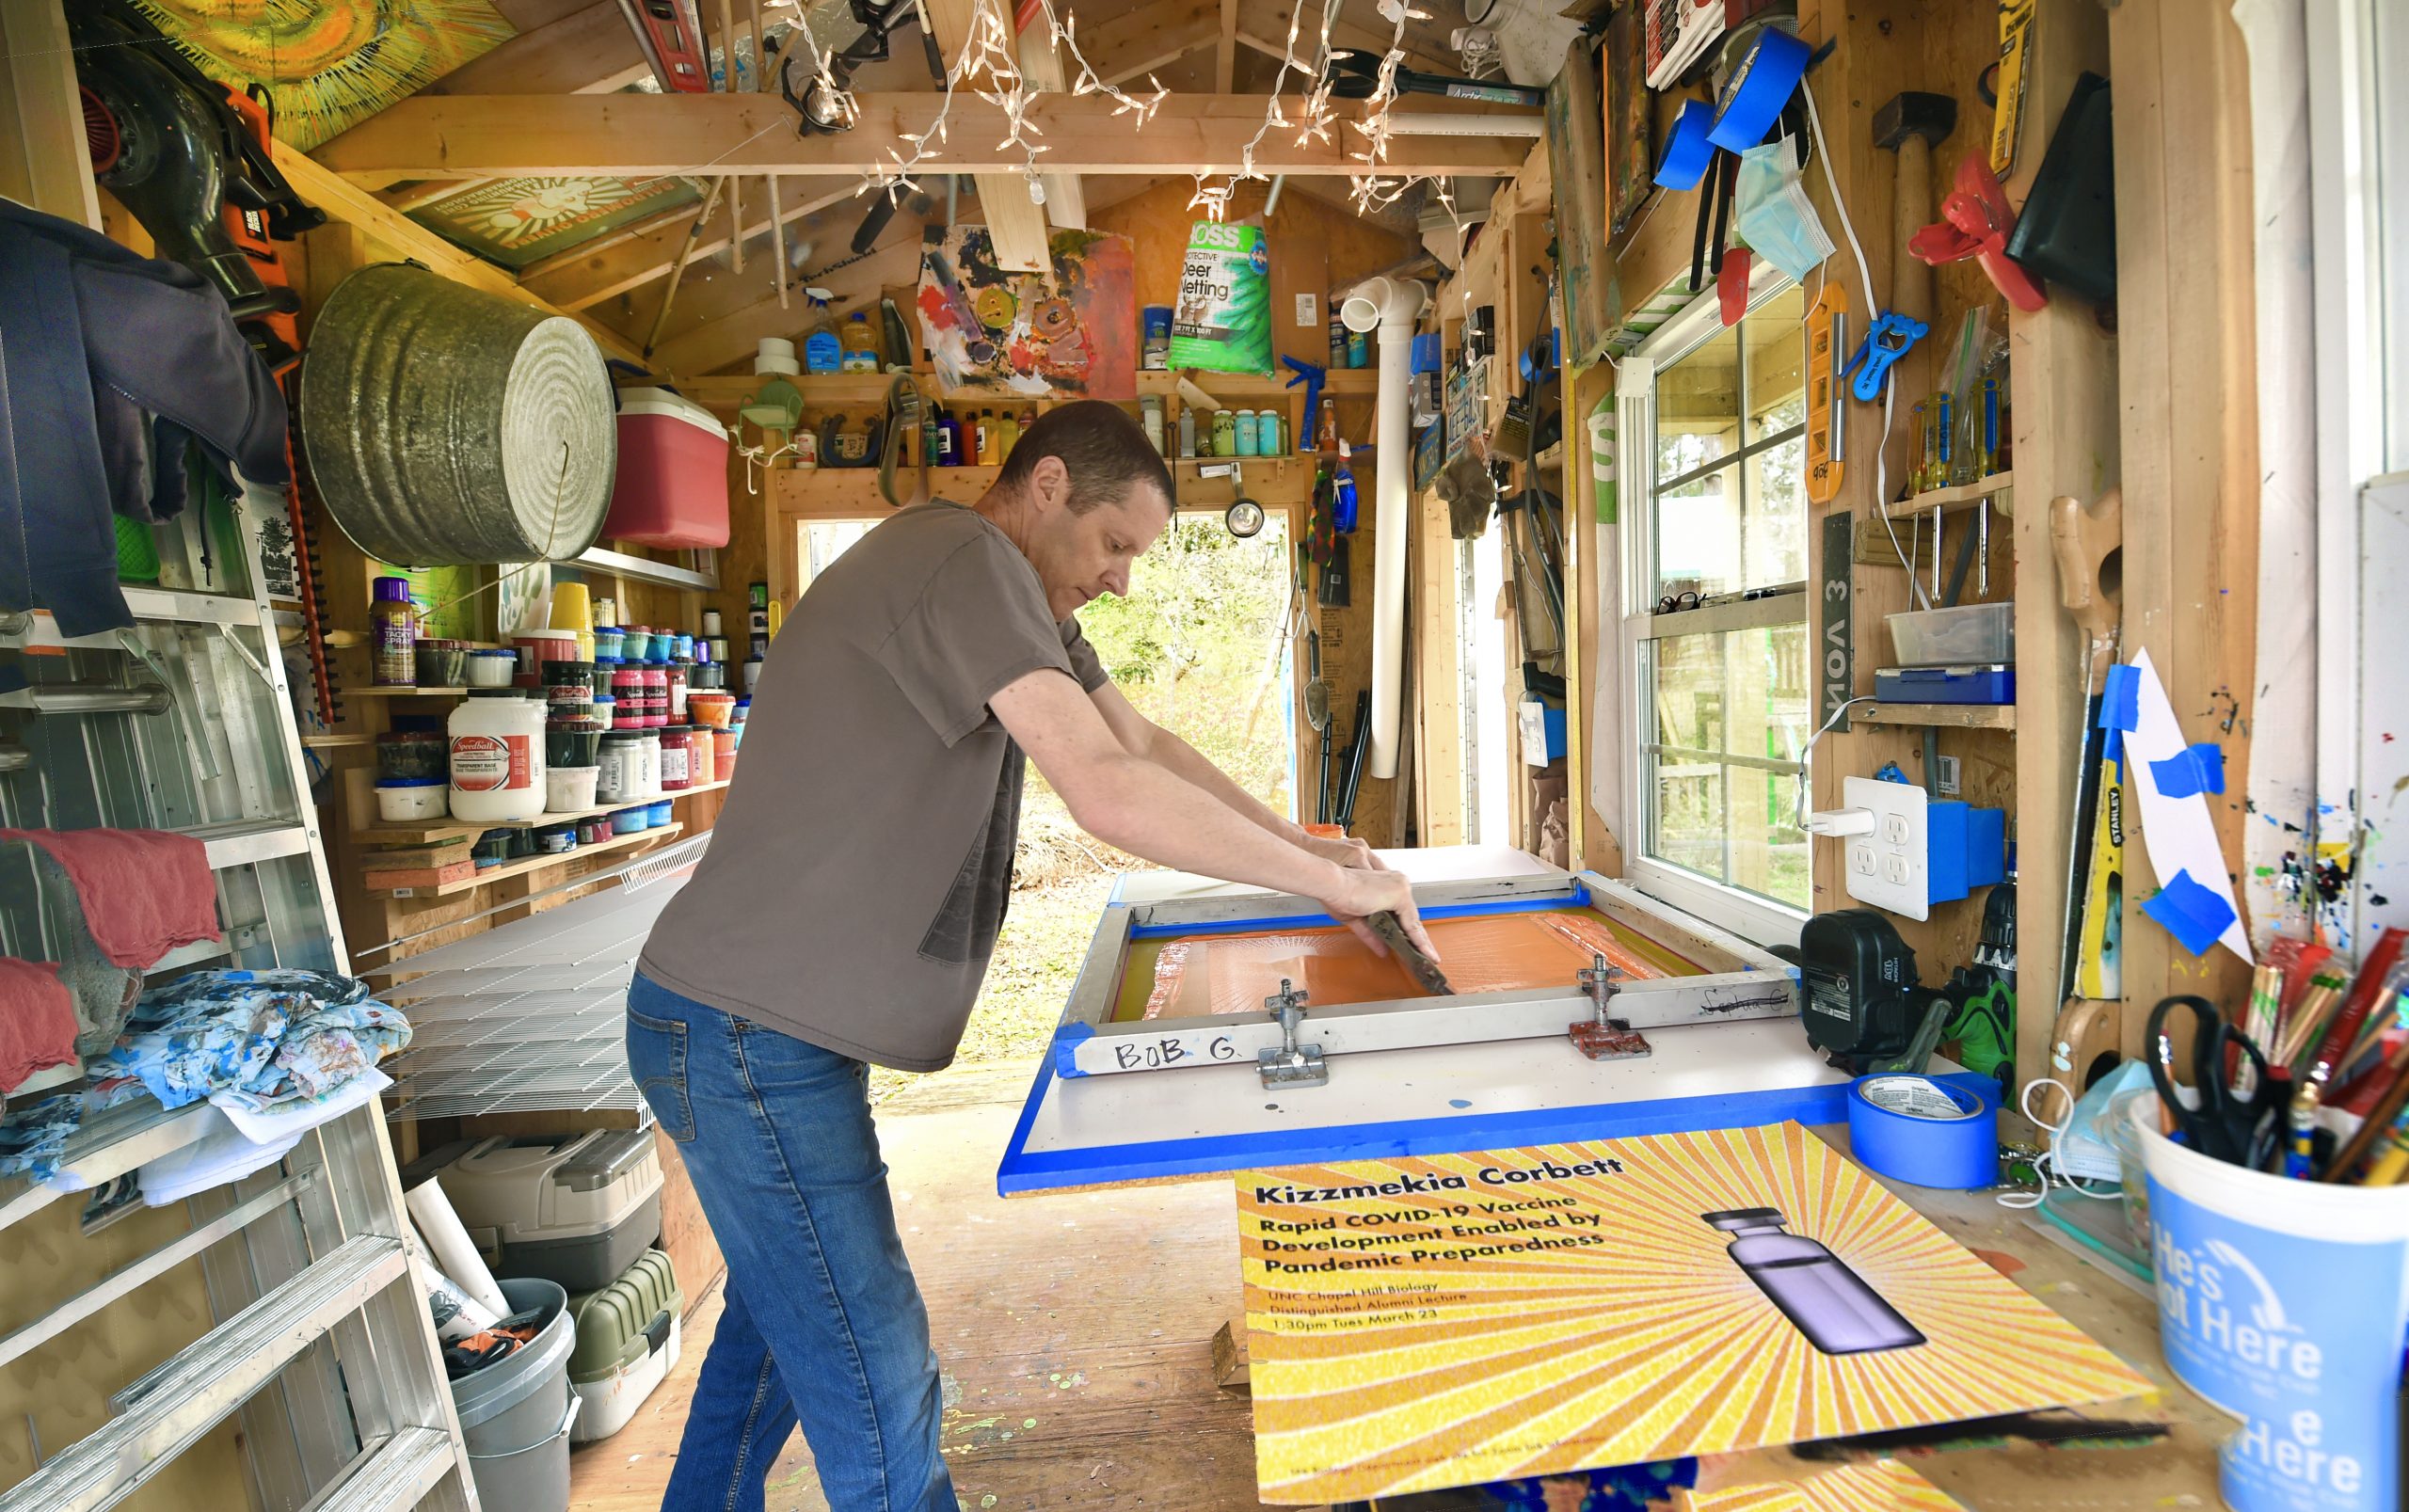 Goldstein demonstrates how to screen print a poster using the color orange.